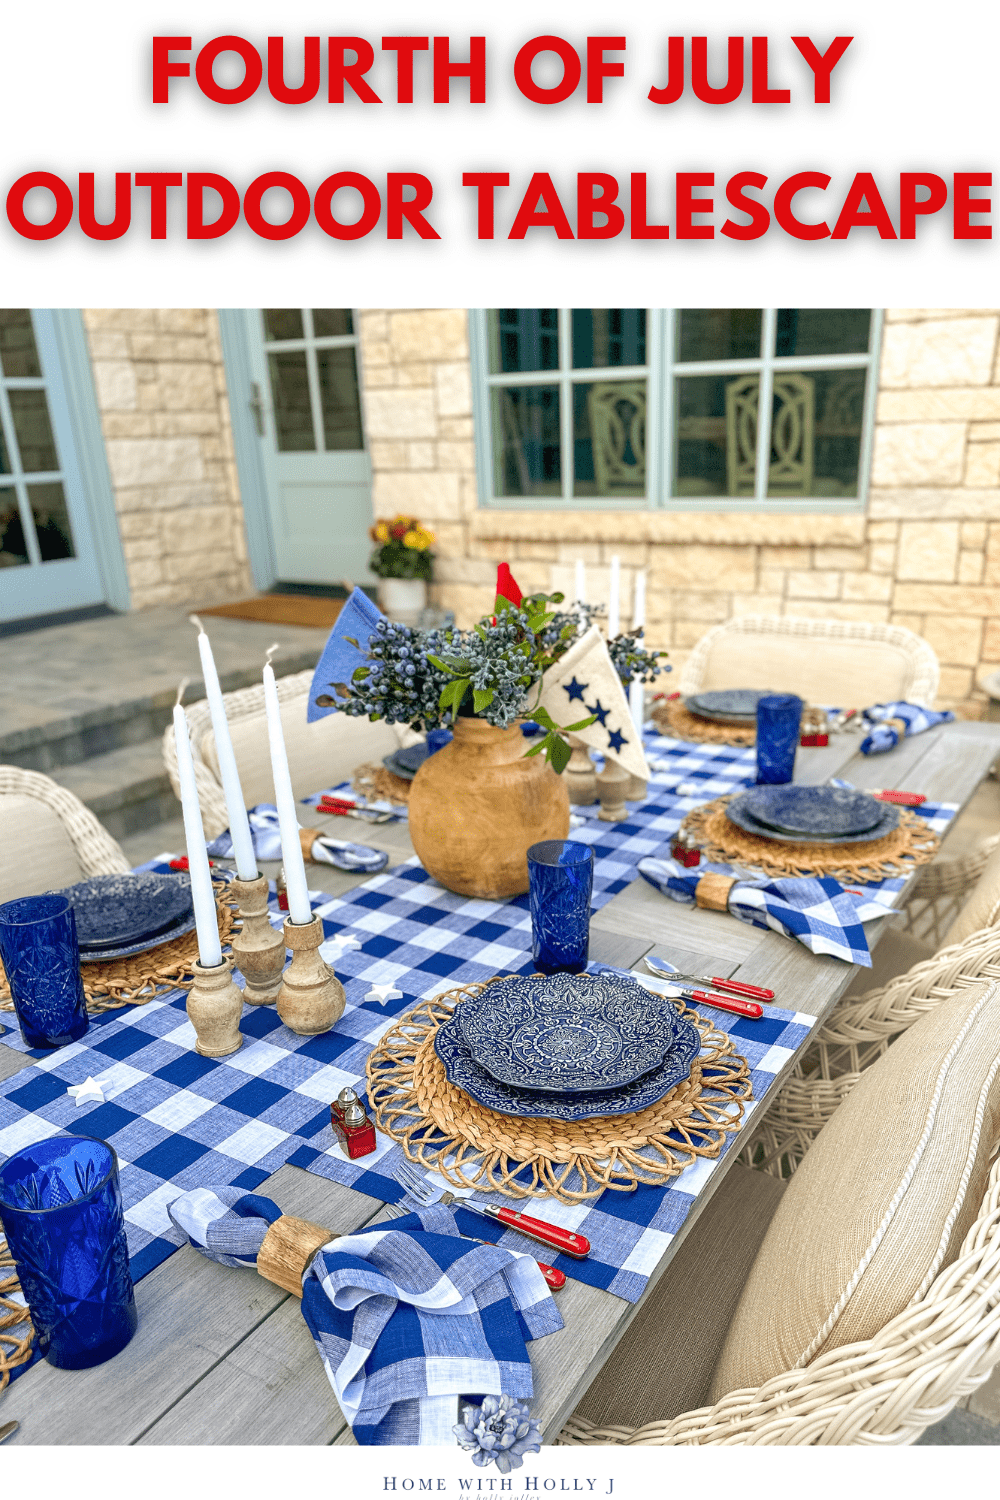 Looking to create the perfect patriotic outdoor tablescape? Get inspired with our Fourth of July table setting ideas.